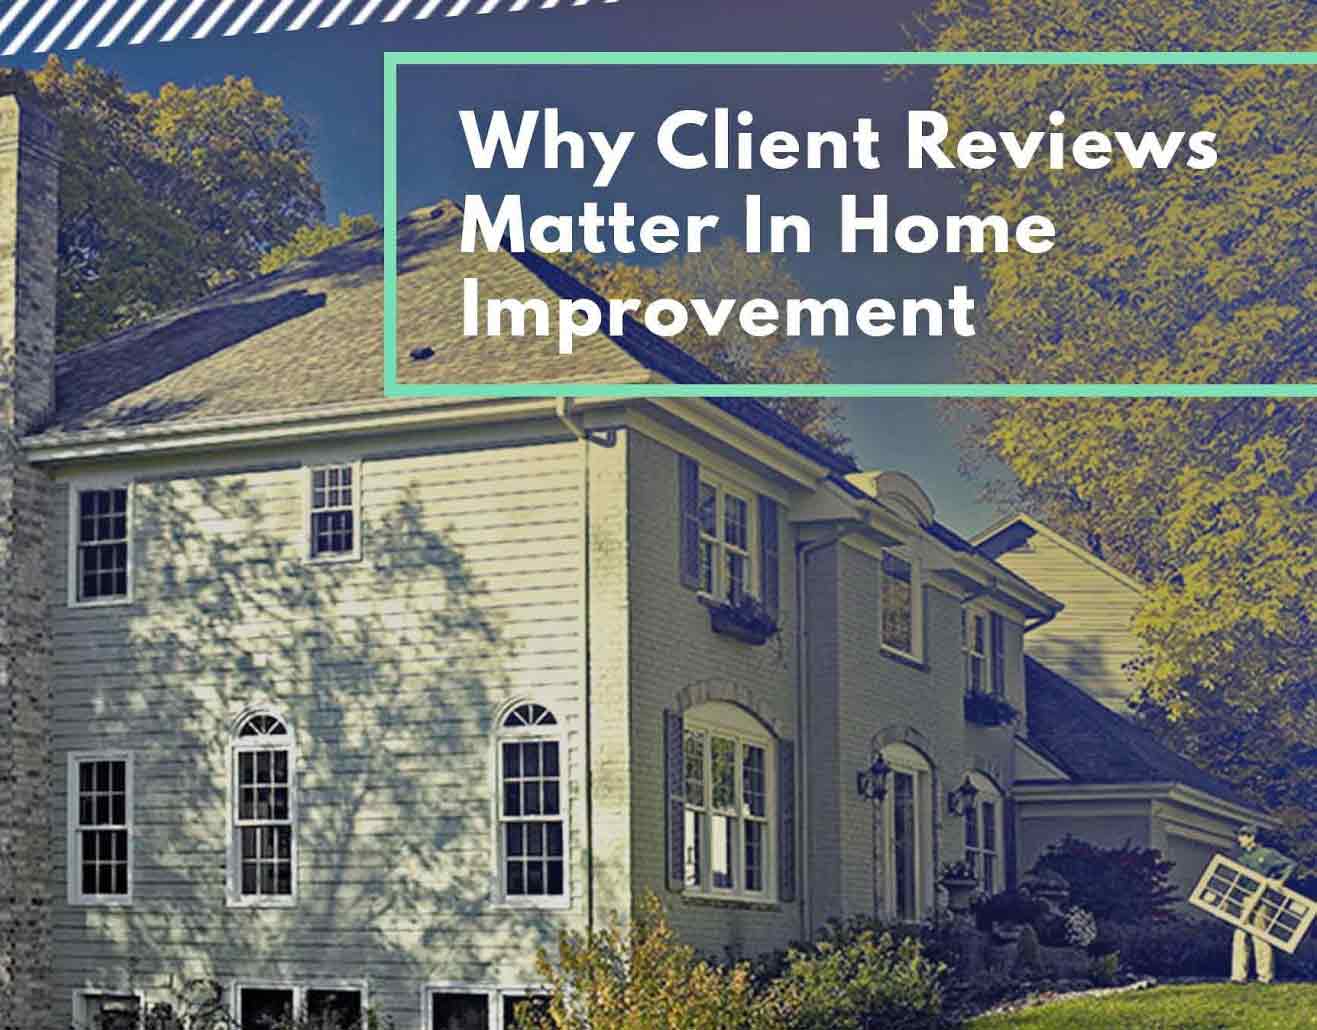 Why Client Reviews Matter in Home Improvement